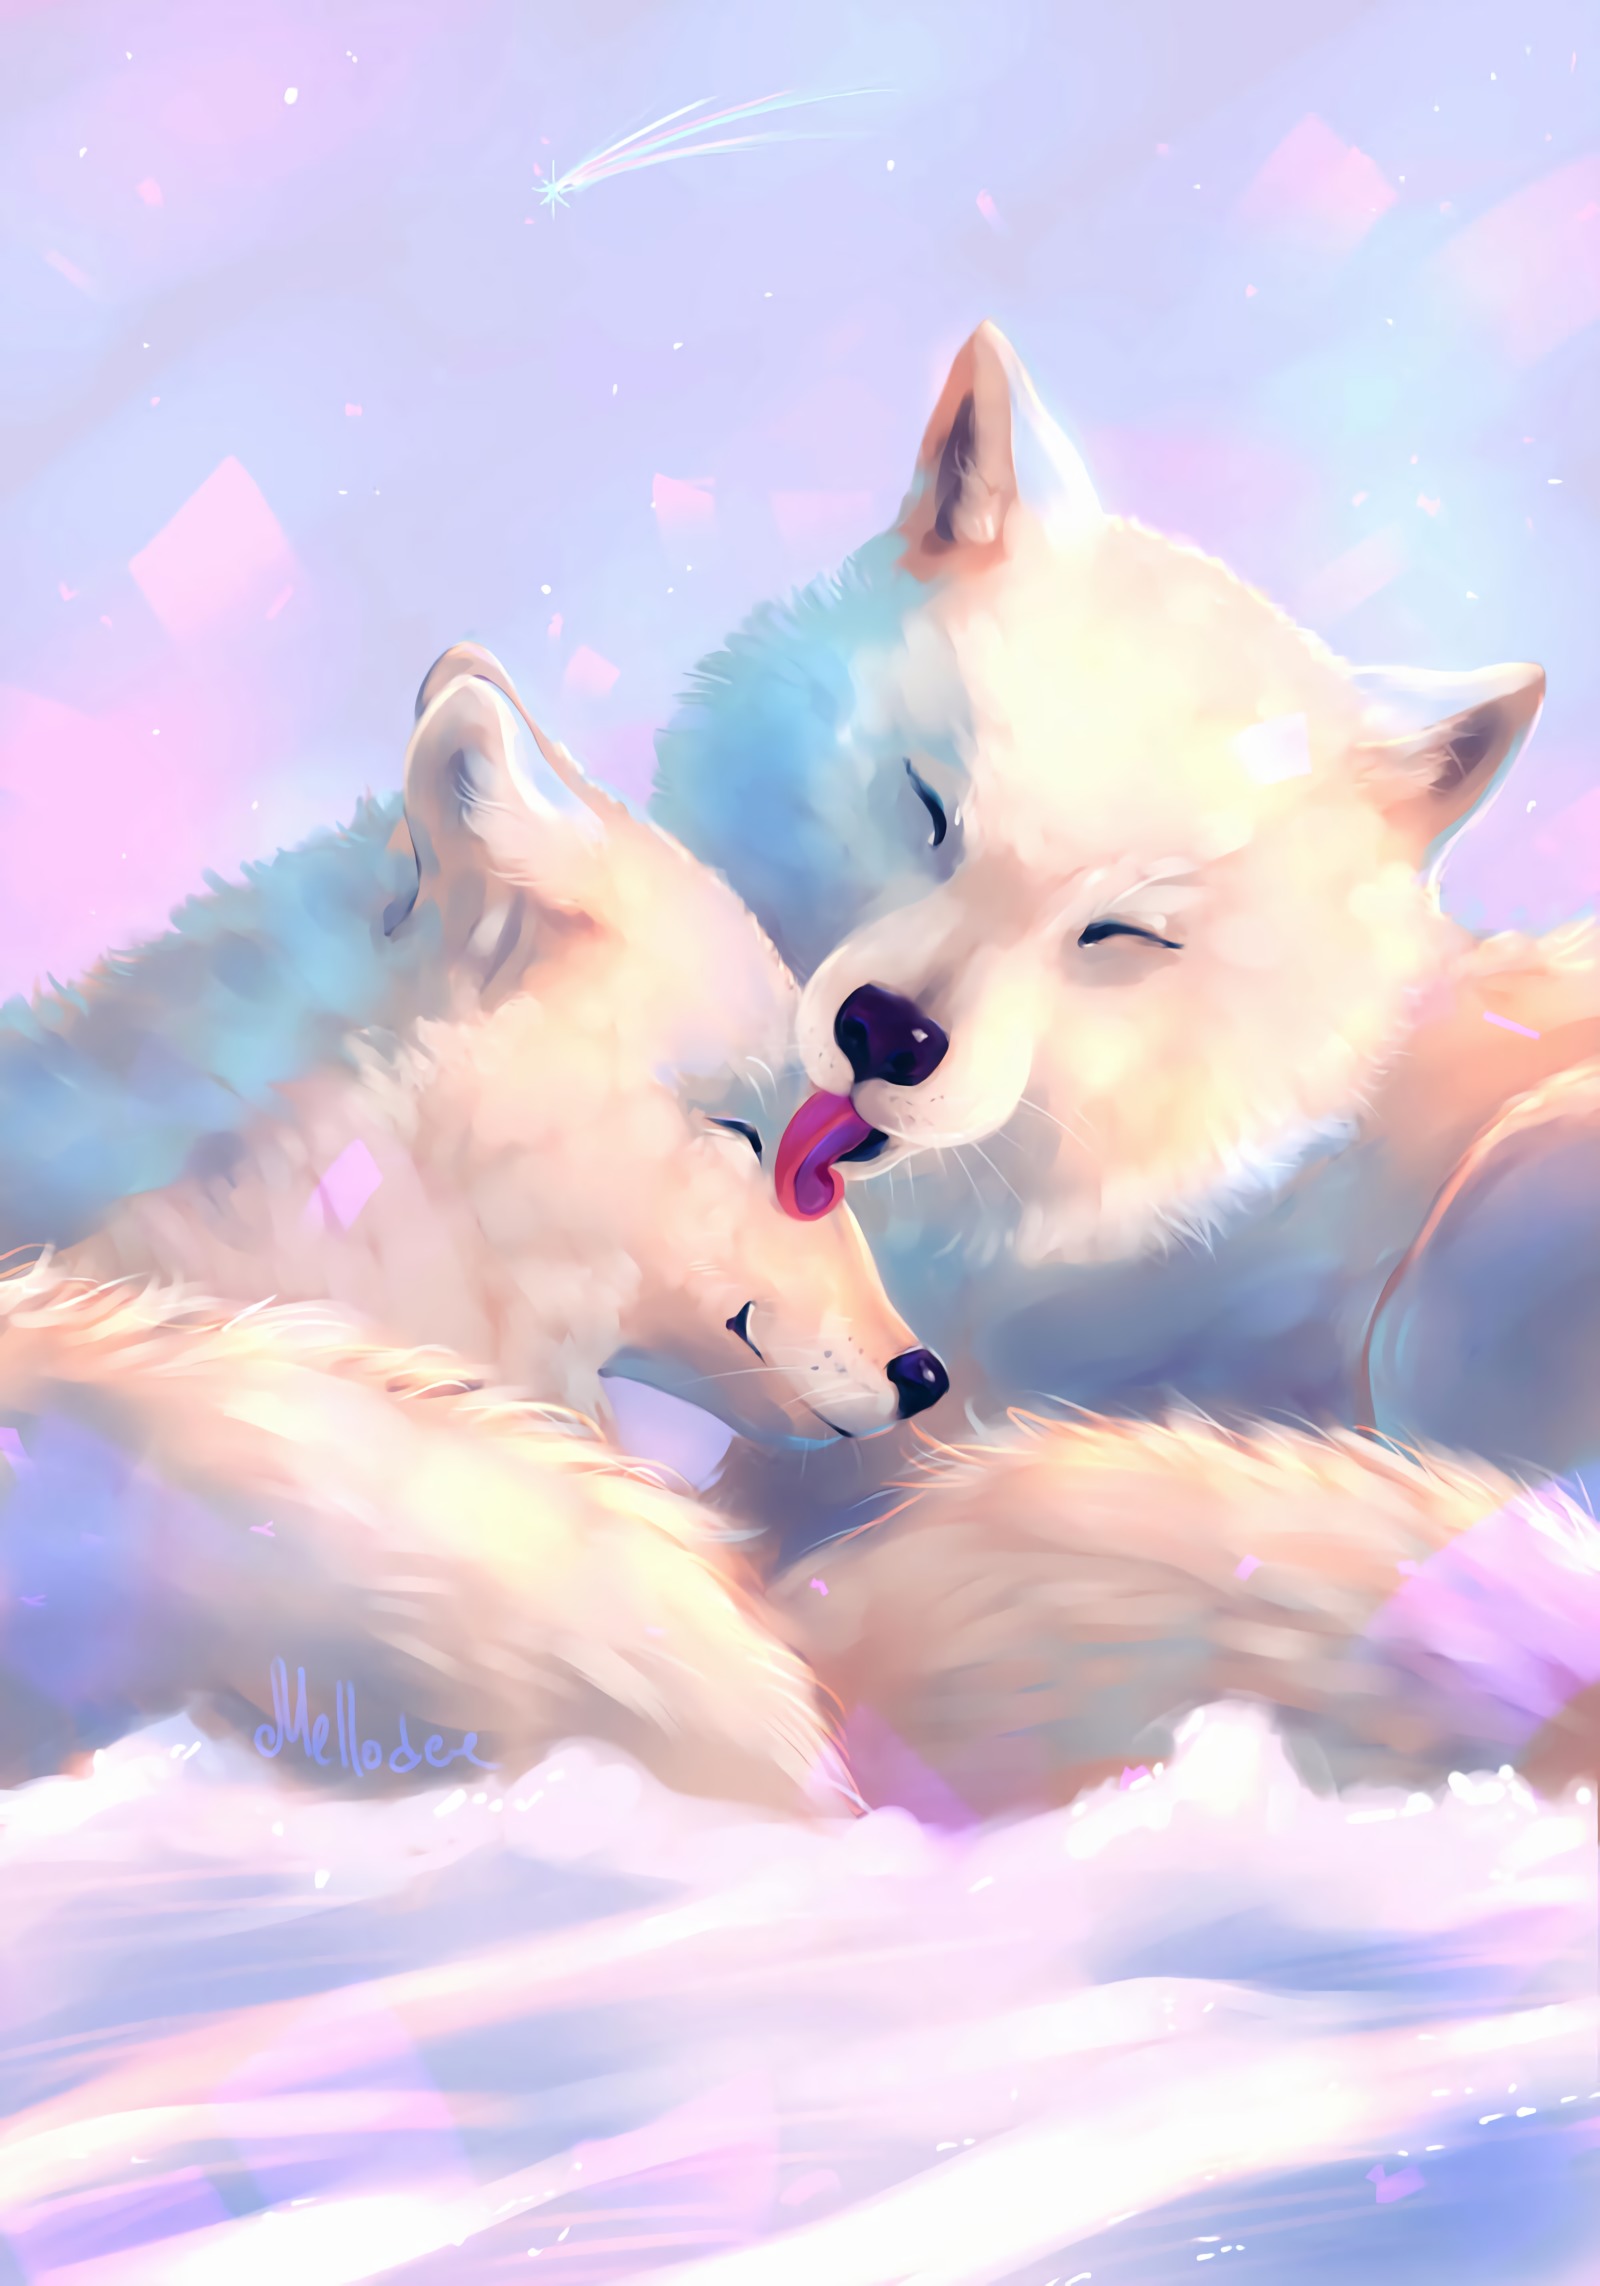 143334 download wallpaper art, white, wolfs, care, tenderness, language, tongue screensavers and pictures for free